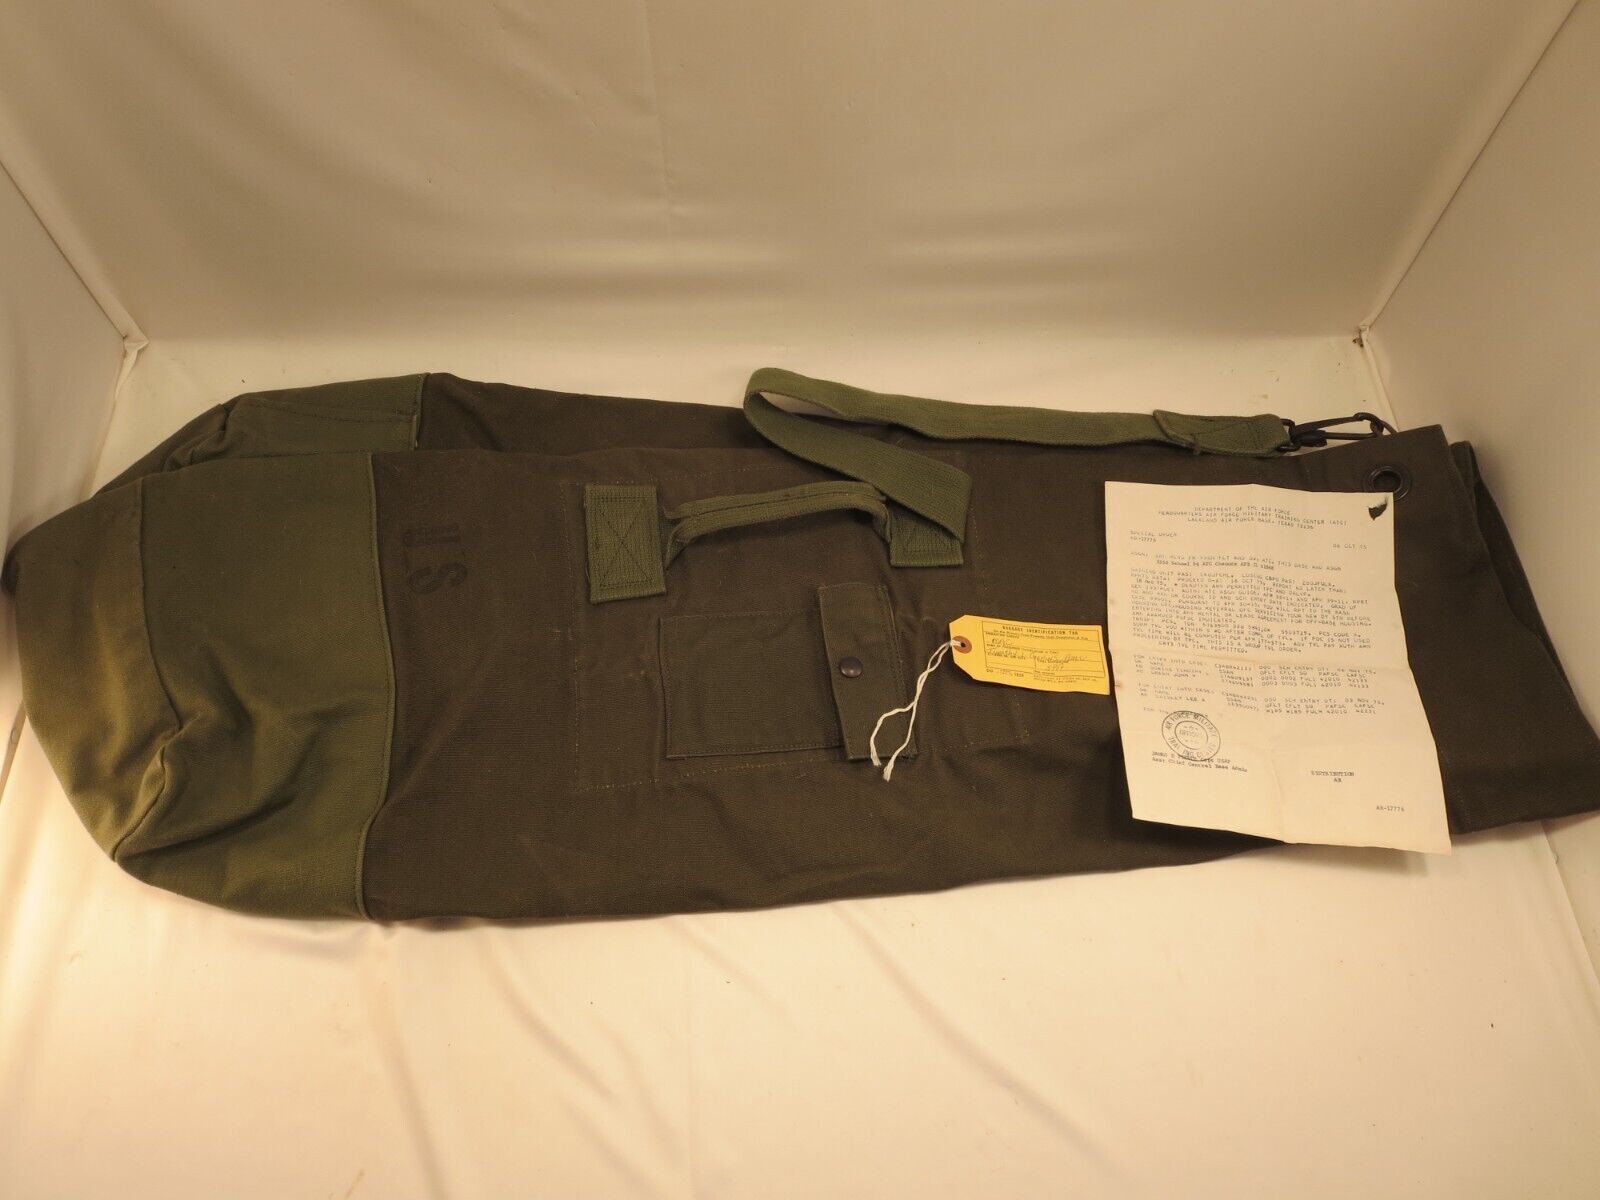 Vintage US Military Duffle Bag Rucksack Canvas with 1975 Marching Orders